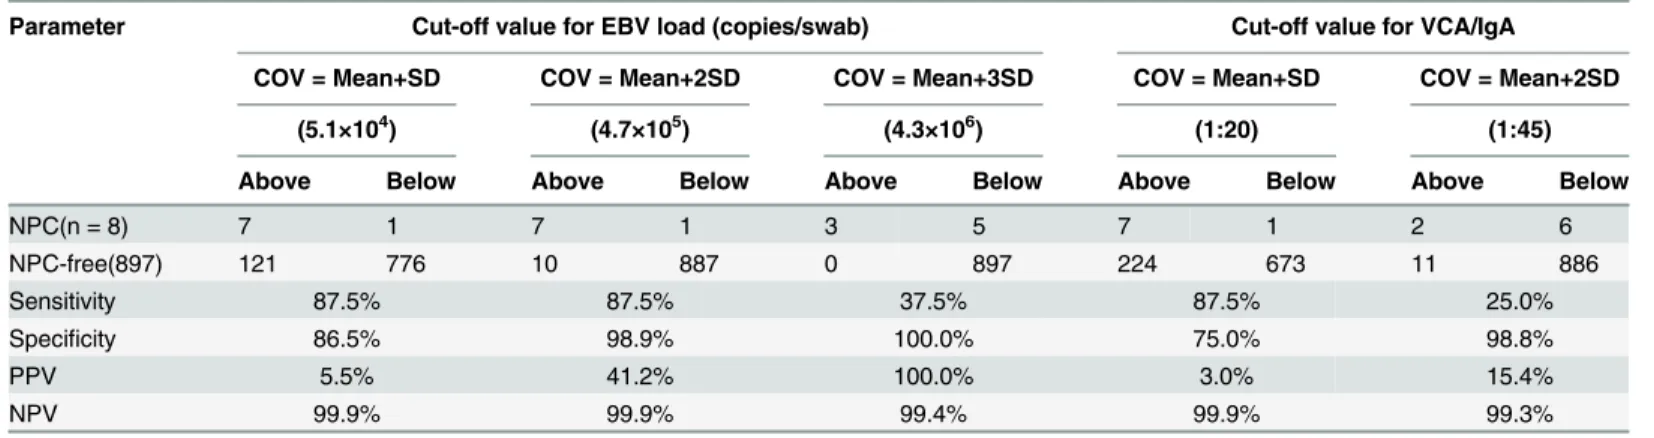 Table 6. Cut-off values for EBV load and VCA/IgA titers.